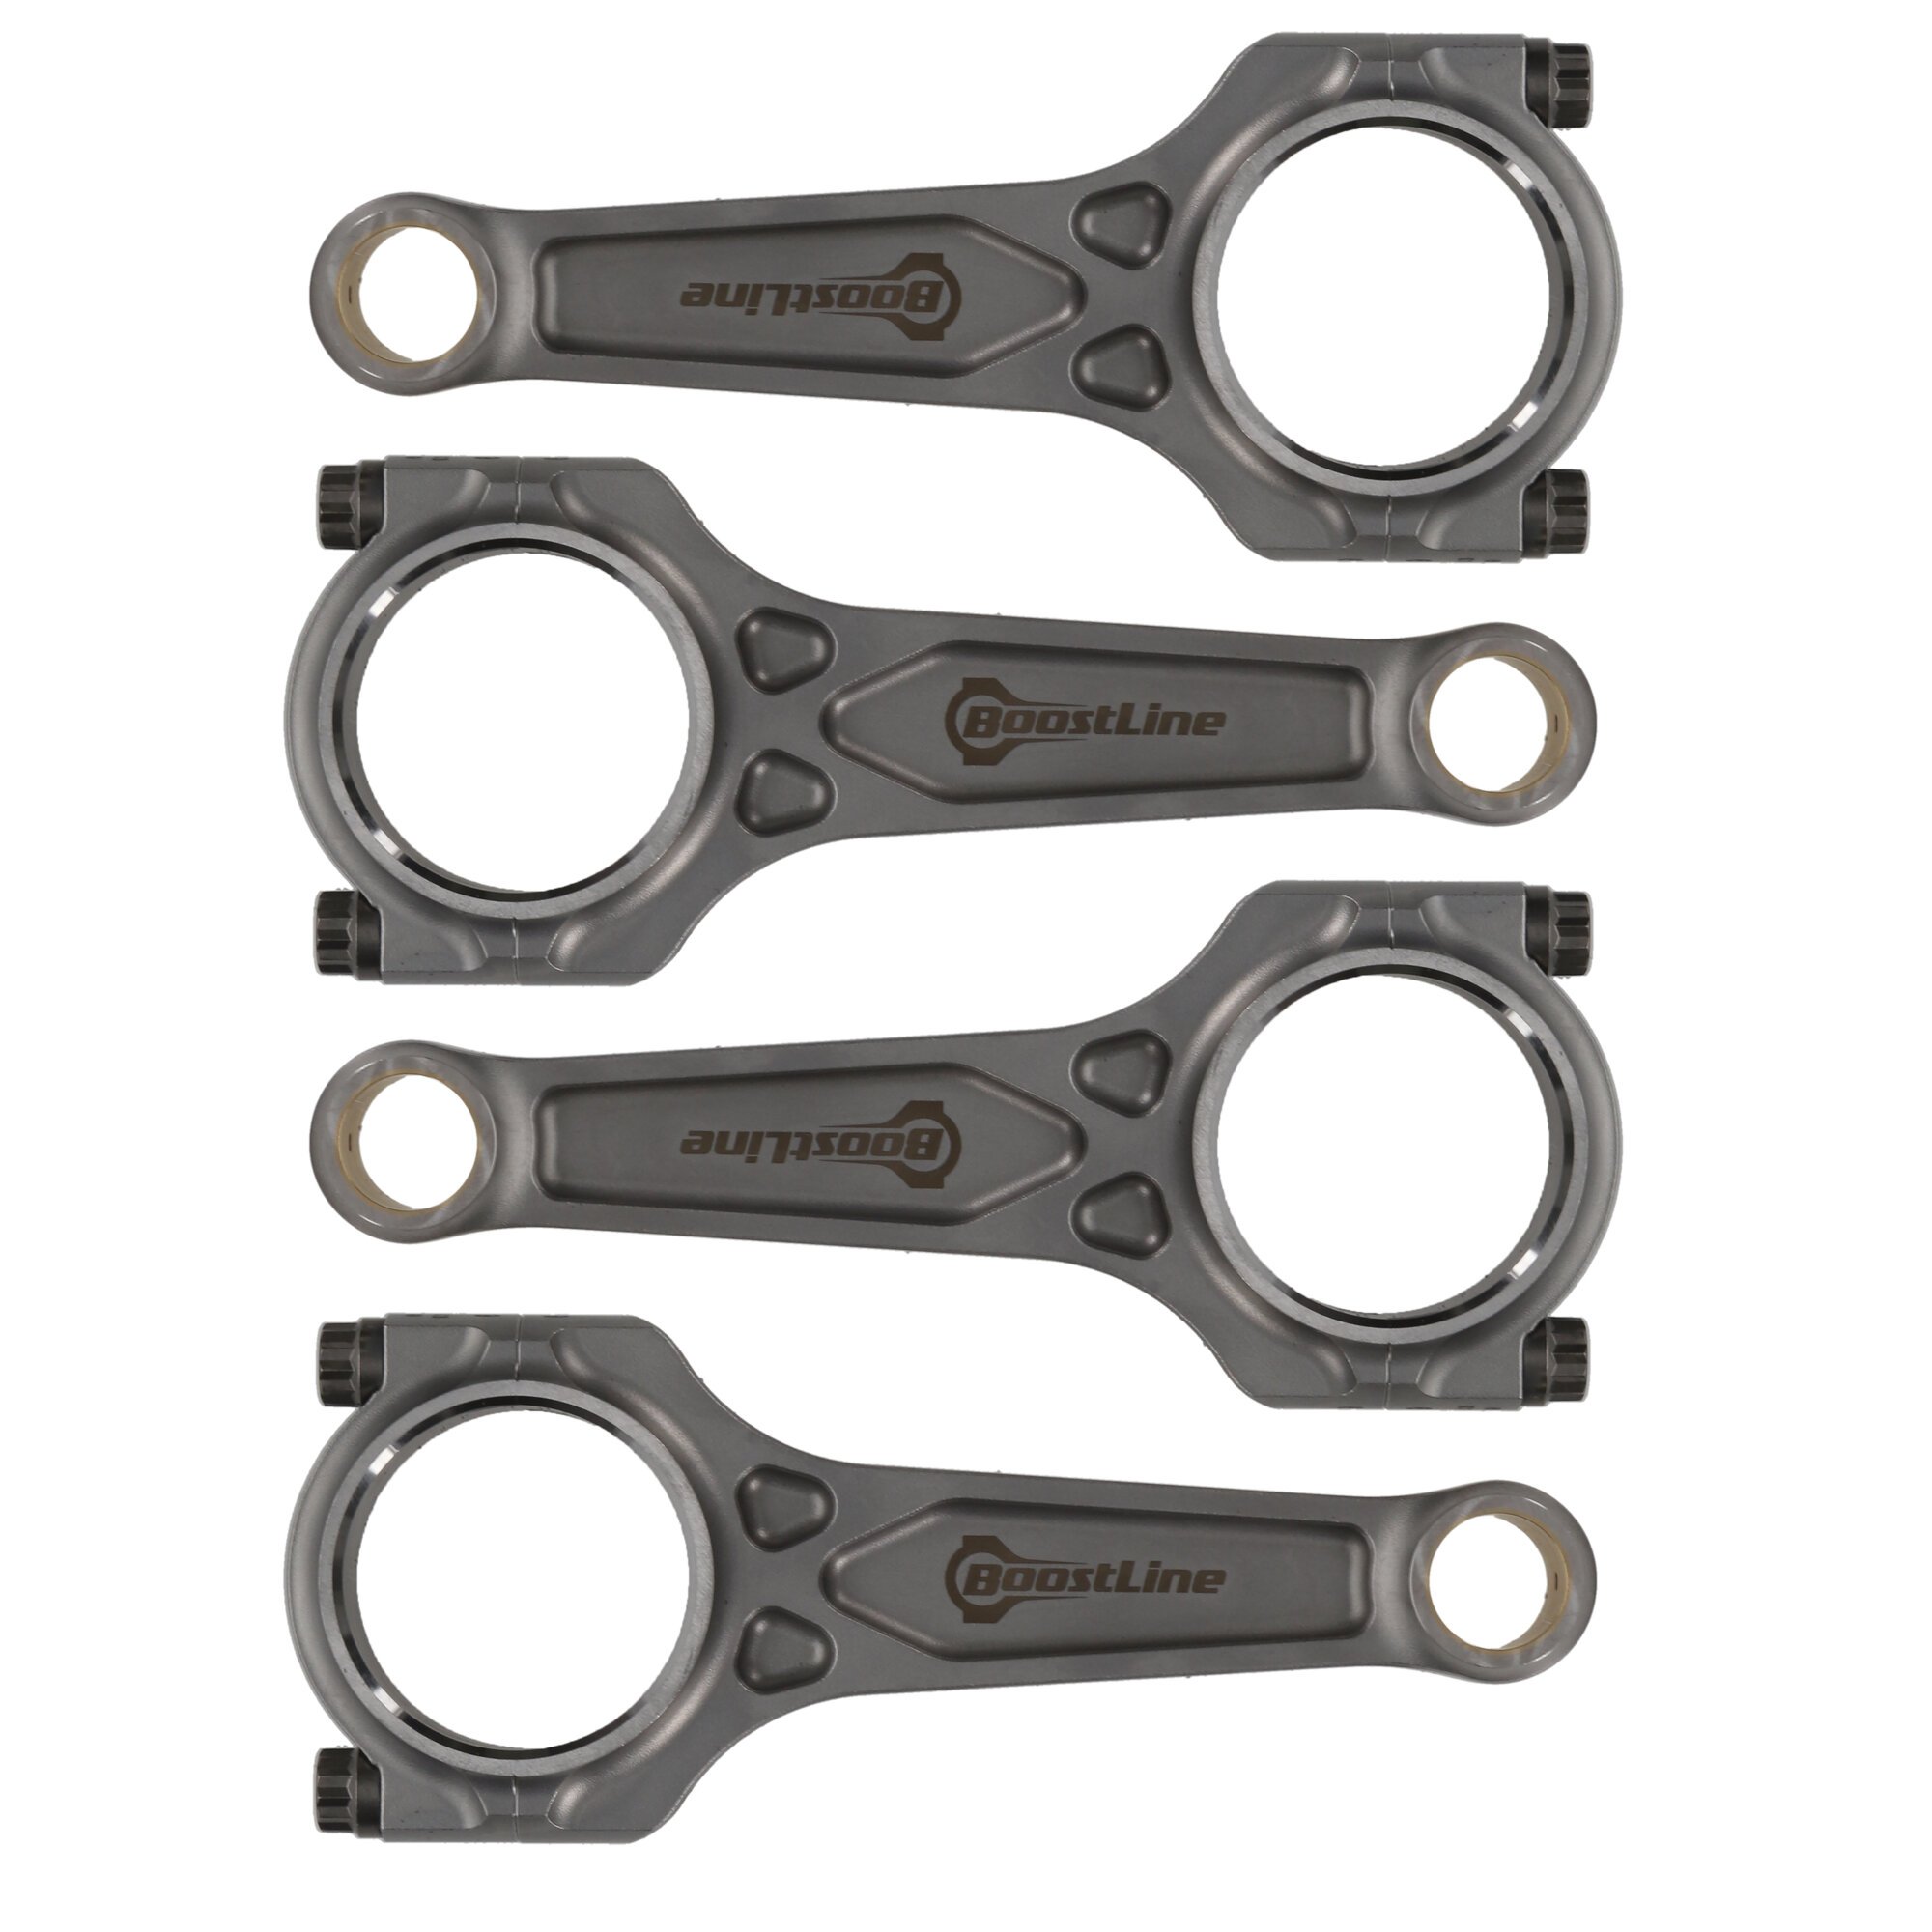 Volkswagen, 2.0T TS1 2013+ EURO 2015+ USA 23mm Pin, 144.00 mm Length, Connecting Rod Set